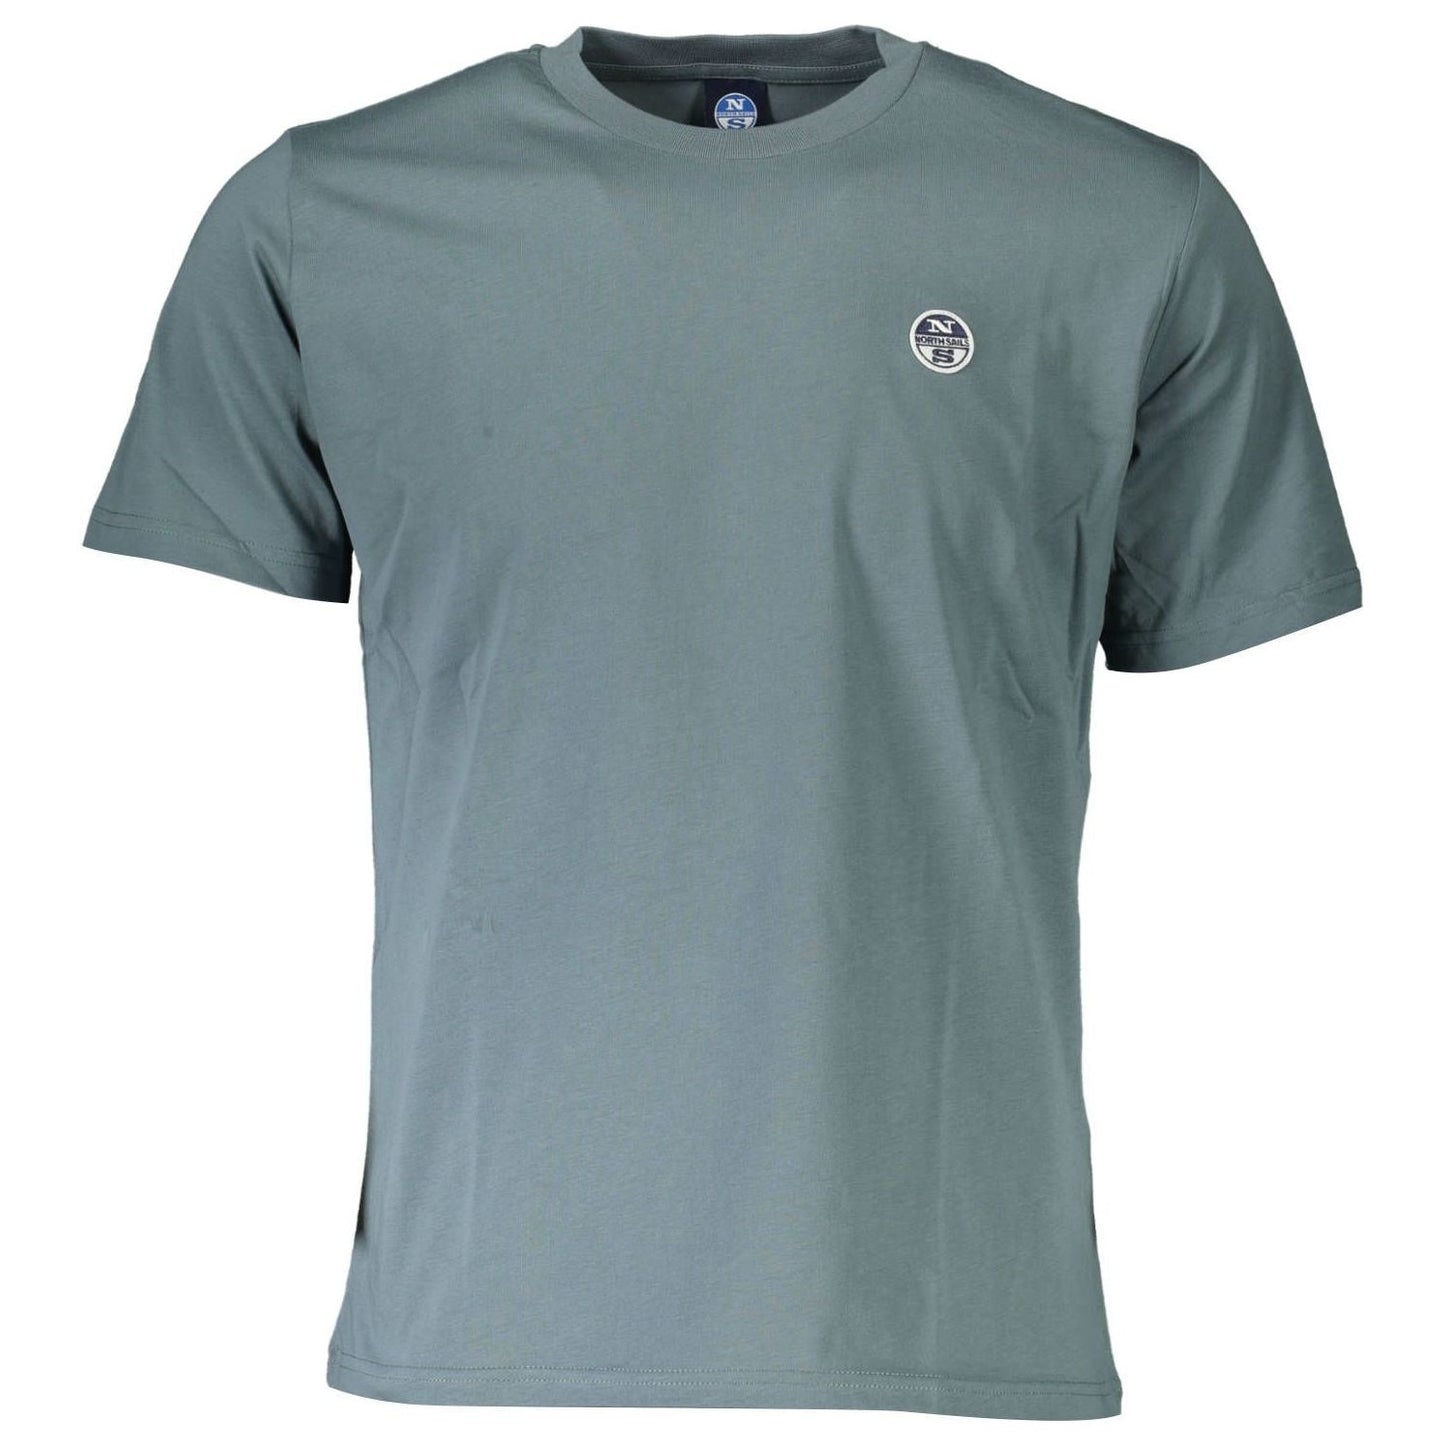 North Sails Chic Green Round Neck Tee with Logo Detail chic-green-round-neck-tee-with-logo-detail